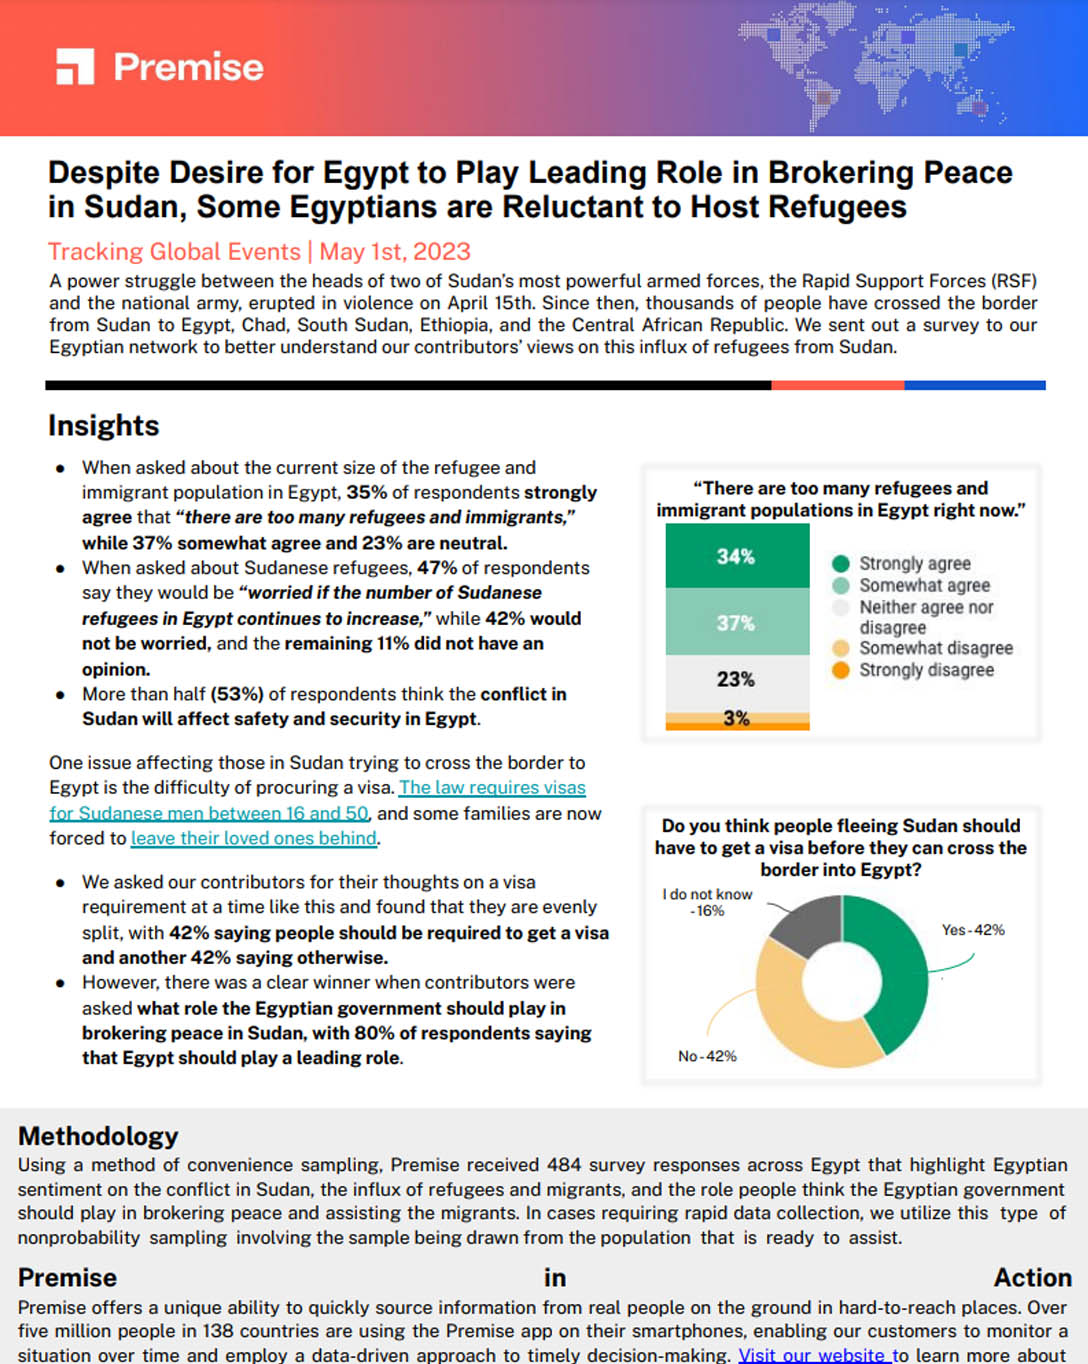 Despite Desire for Egypt to Play Leading Role in Brokering Peace in Sudan, Some Egyptians are Reluctant to Host Refugees